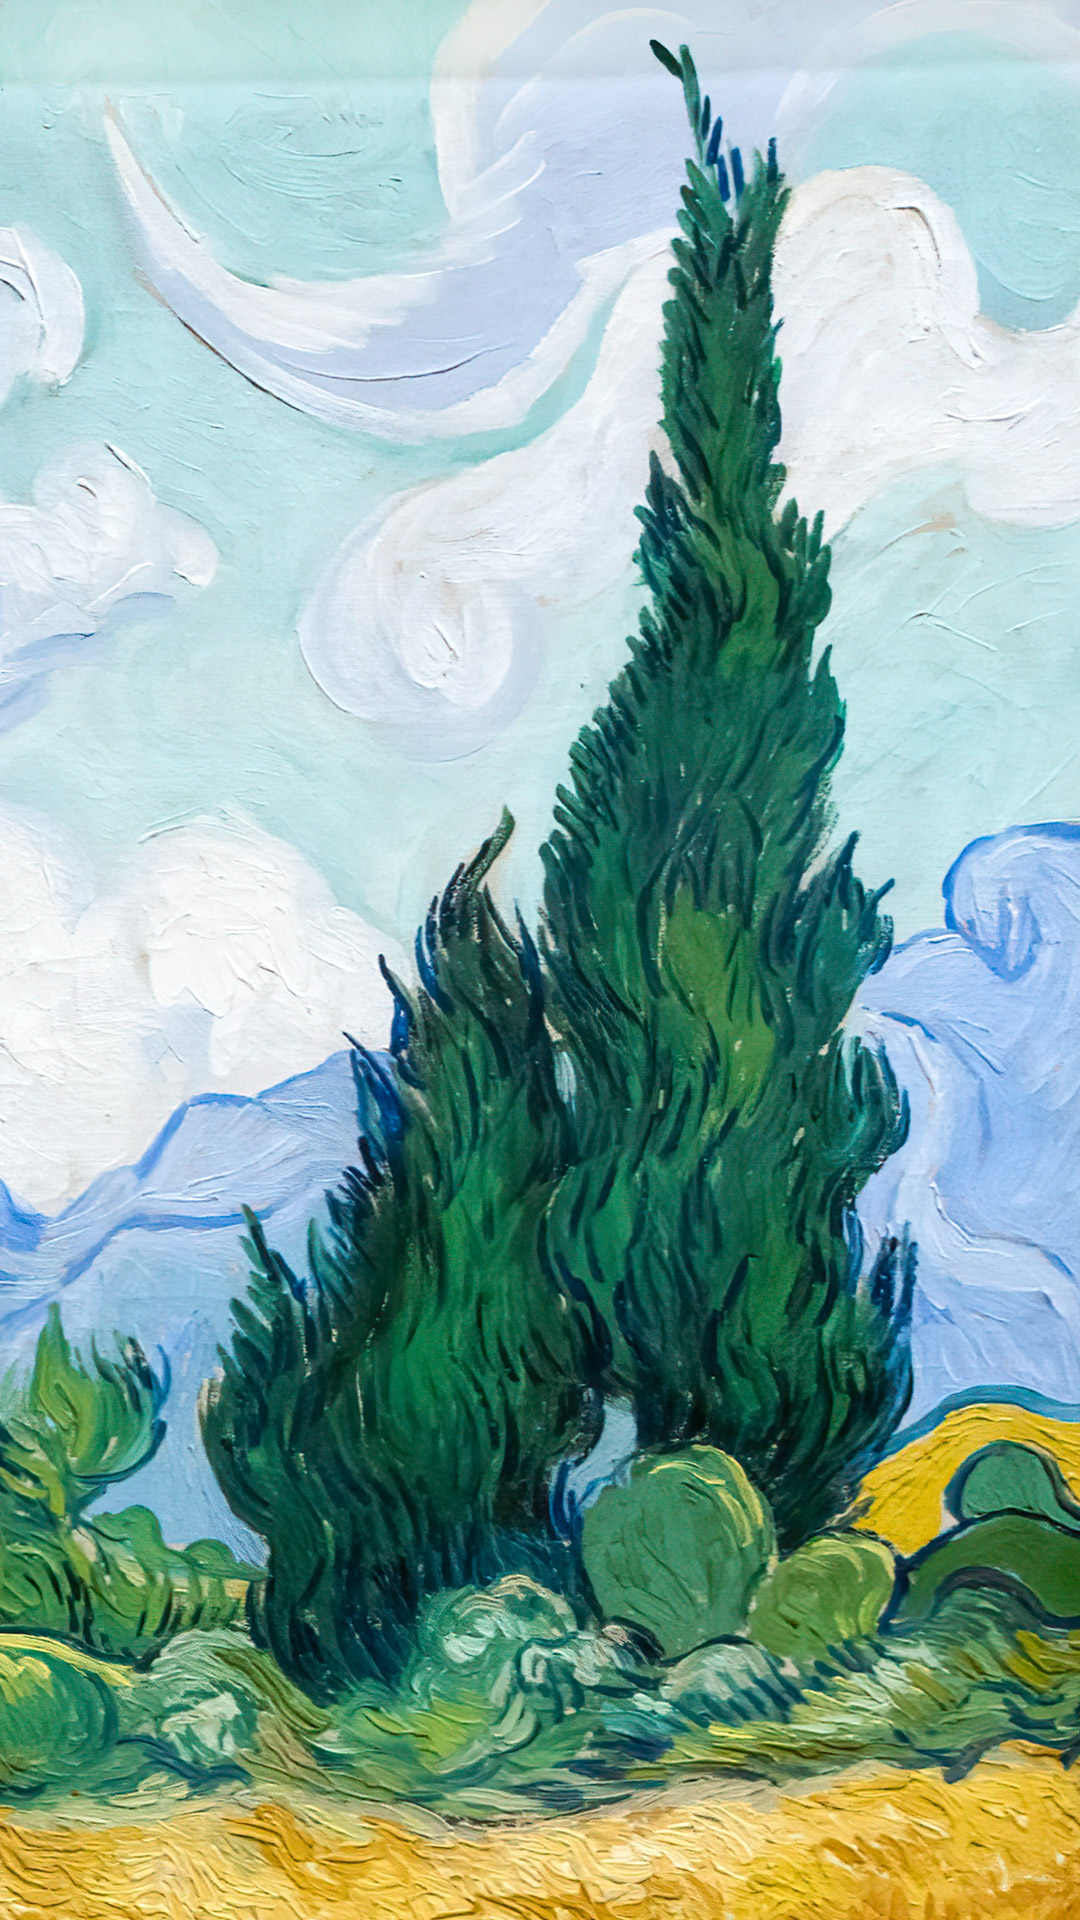 Wander through the golden fields of Wheat Field with Cypresses mobile wallpaper, as Van Gogh's artistic brilliance transforms your digital backdrop.